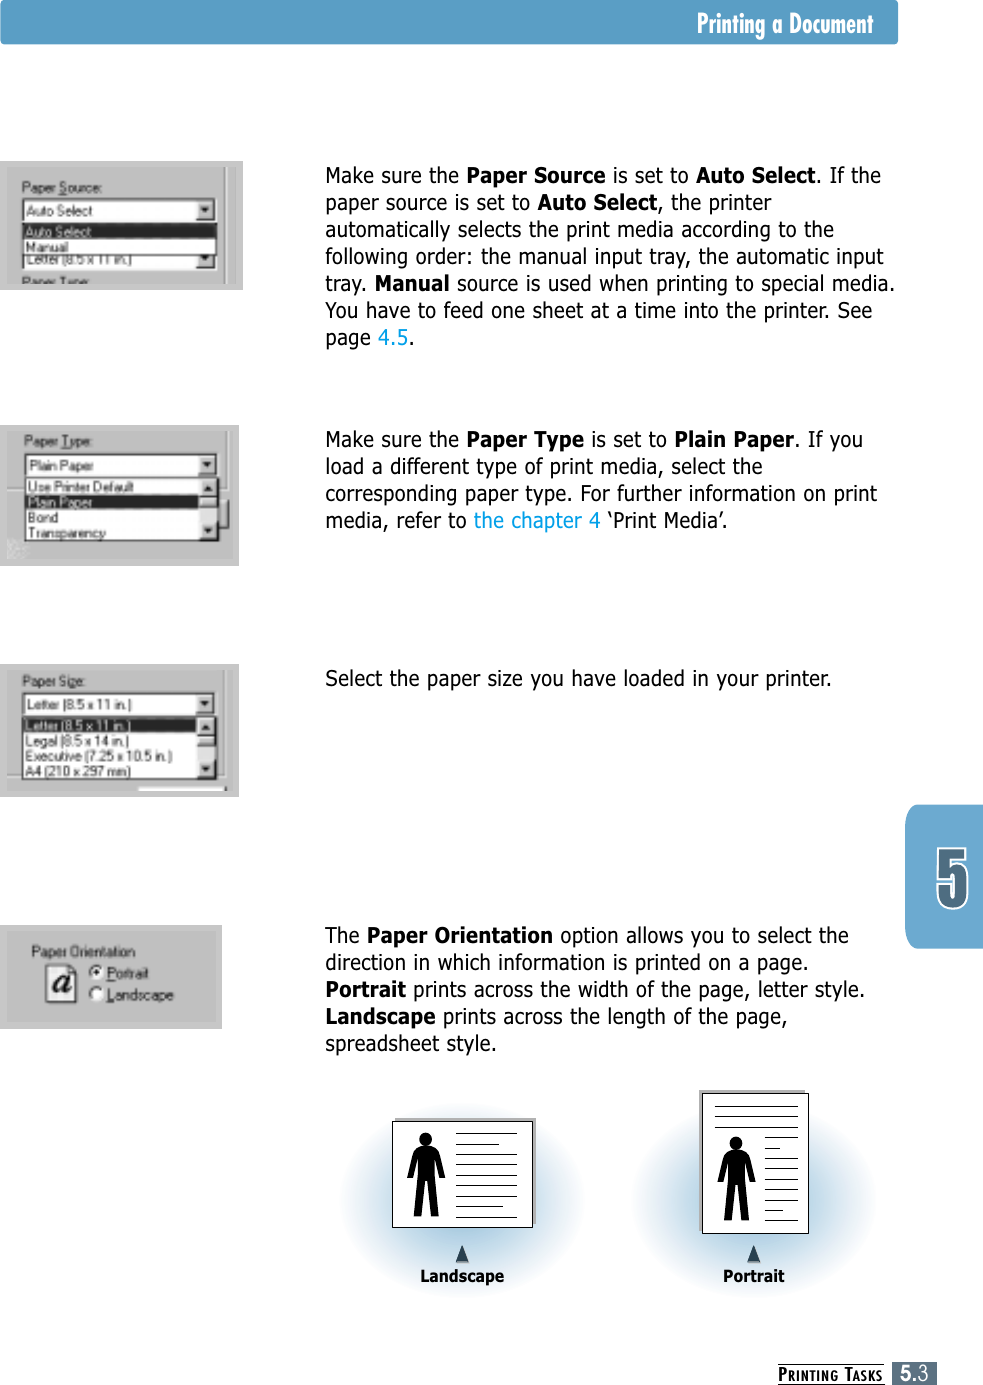 PRINTING TASKS5.3Printing a Document4Make sure the Paper Source is set to Auto Select. If thepaper source is set to Auto Select, the printerautomatically selects the print media according to thefollowing order: the manual input tray, the automatic inputtray. Manual source is used when printing to special media.You have to feed one sheet at a time into the printer. Seepage 4.5.4Make sure the Paper Type is set to Plain Paper. If youload a different type of print media, select thecorresponding paper type. For further information on printmedia, refer to the chapter 4 ‘Print Media’.  4Select the paper size you have loaded in your printer.4The Paper Orientation option allows you to select thedirection in which information is printed on a page.Portrait prints across the width of the page, letter style.Landscape prints across the length of the page,spreadsheet style.➐➐➐➐Landscape➐➐➐➐Portrait